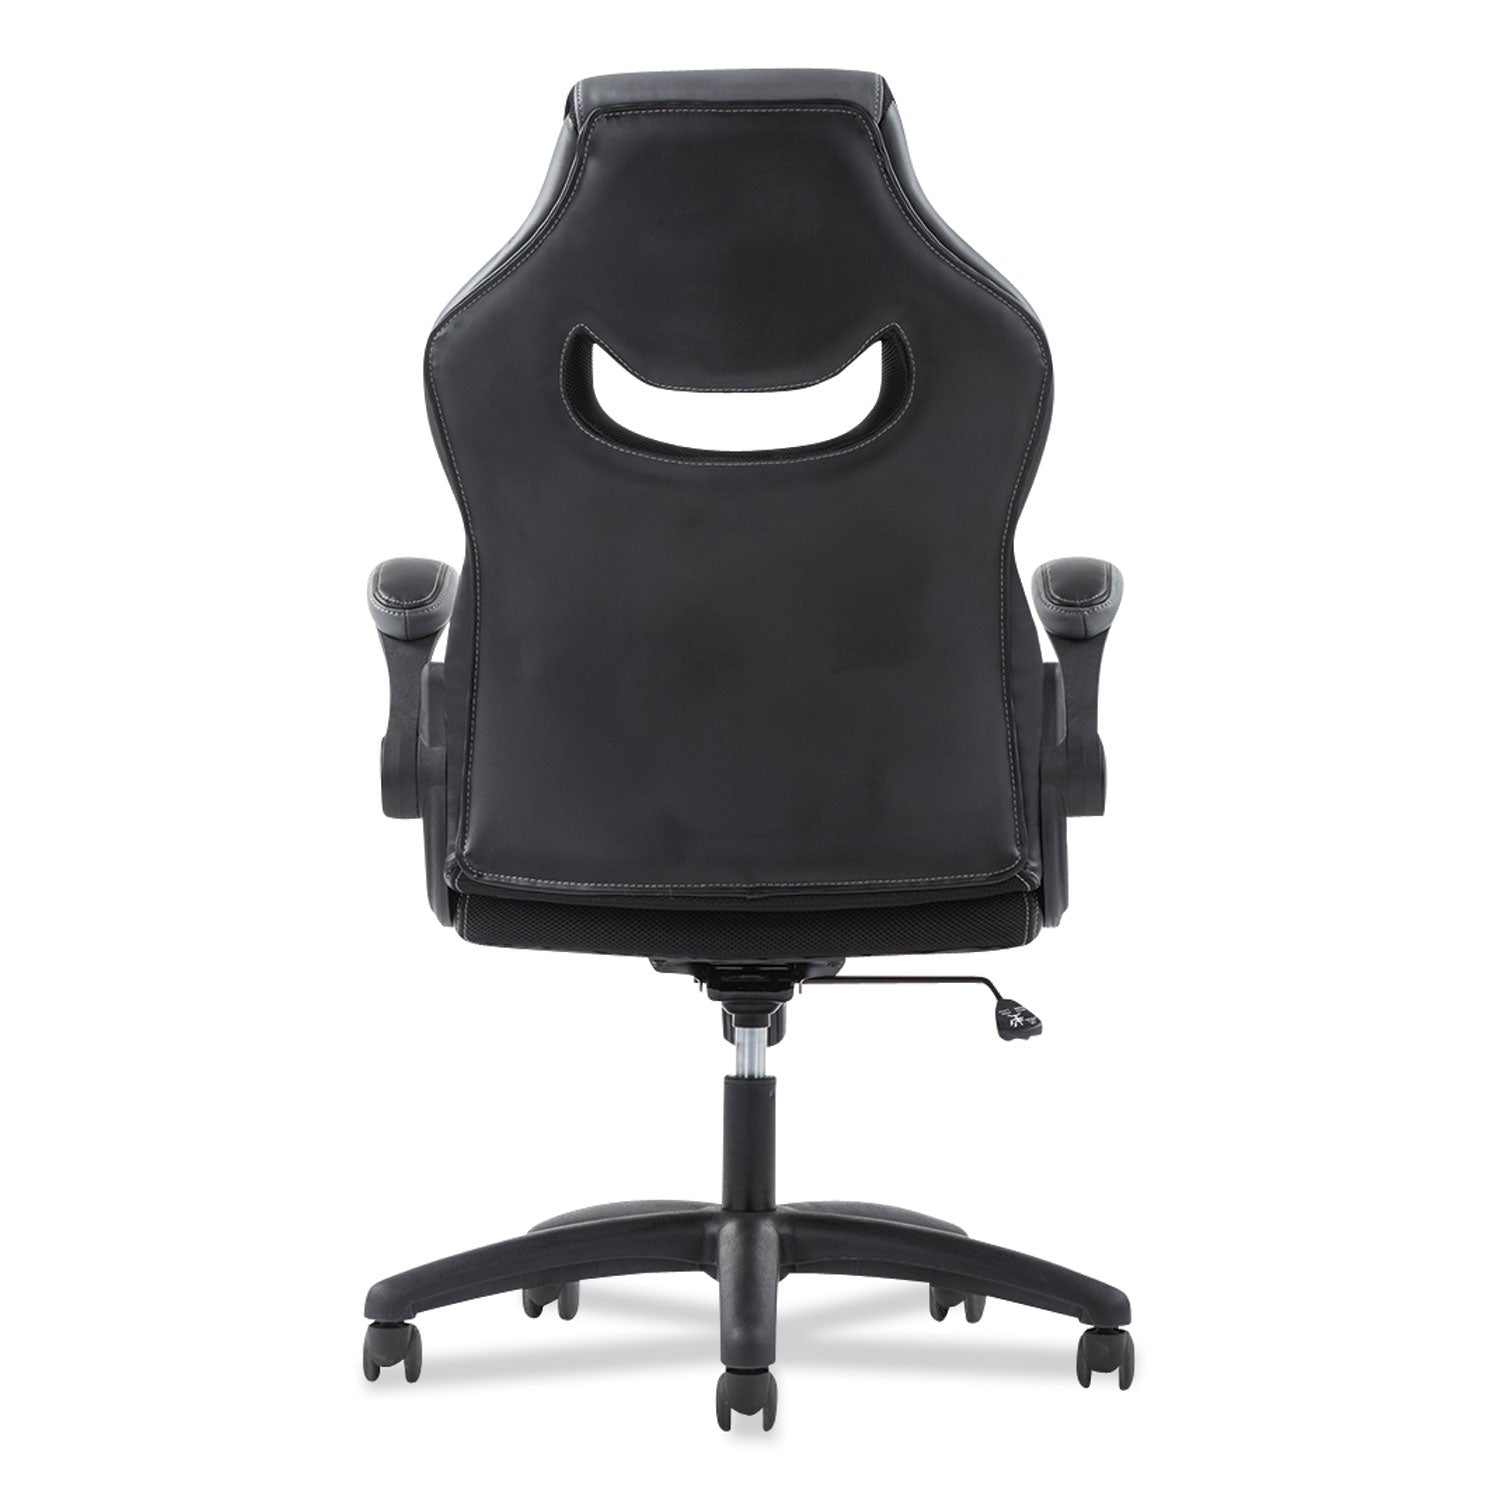 9-one-one-high-back-racing-style-chair-with-flip-up-arms-supports-up-to-225-lb-black-seat-gray-back-black-base_bsxvst911 - 4